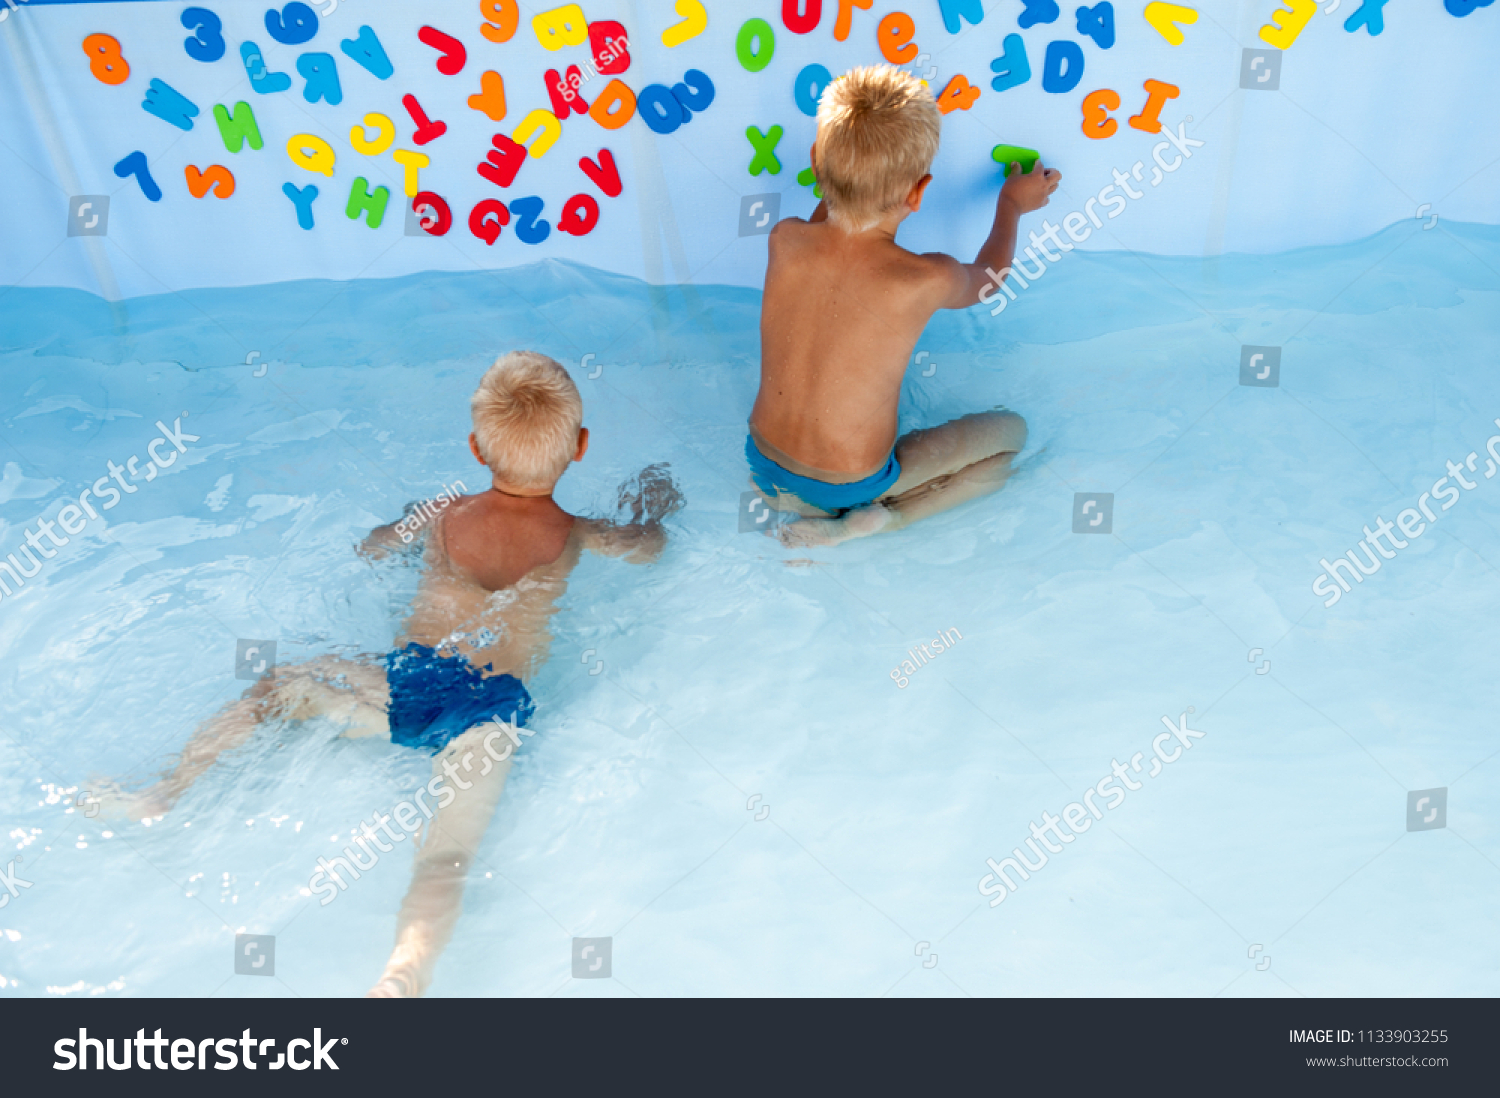 Two happy children play in swimming pool with plastic letters for bathroom. Brothers are happy together in warm water on sunny summer day. Concept of teaching games for preschoolers. Copy space text #1133903255